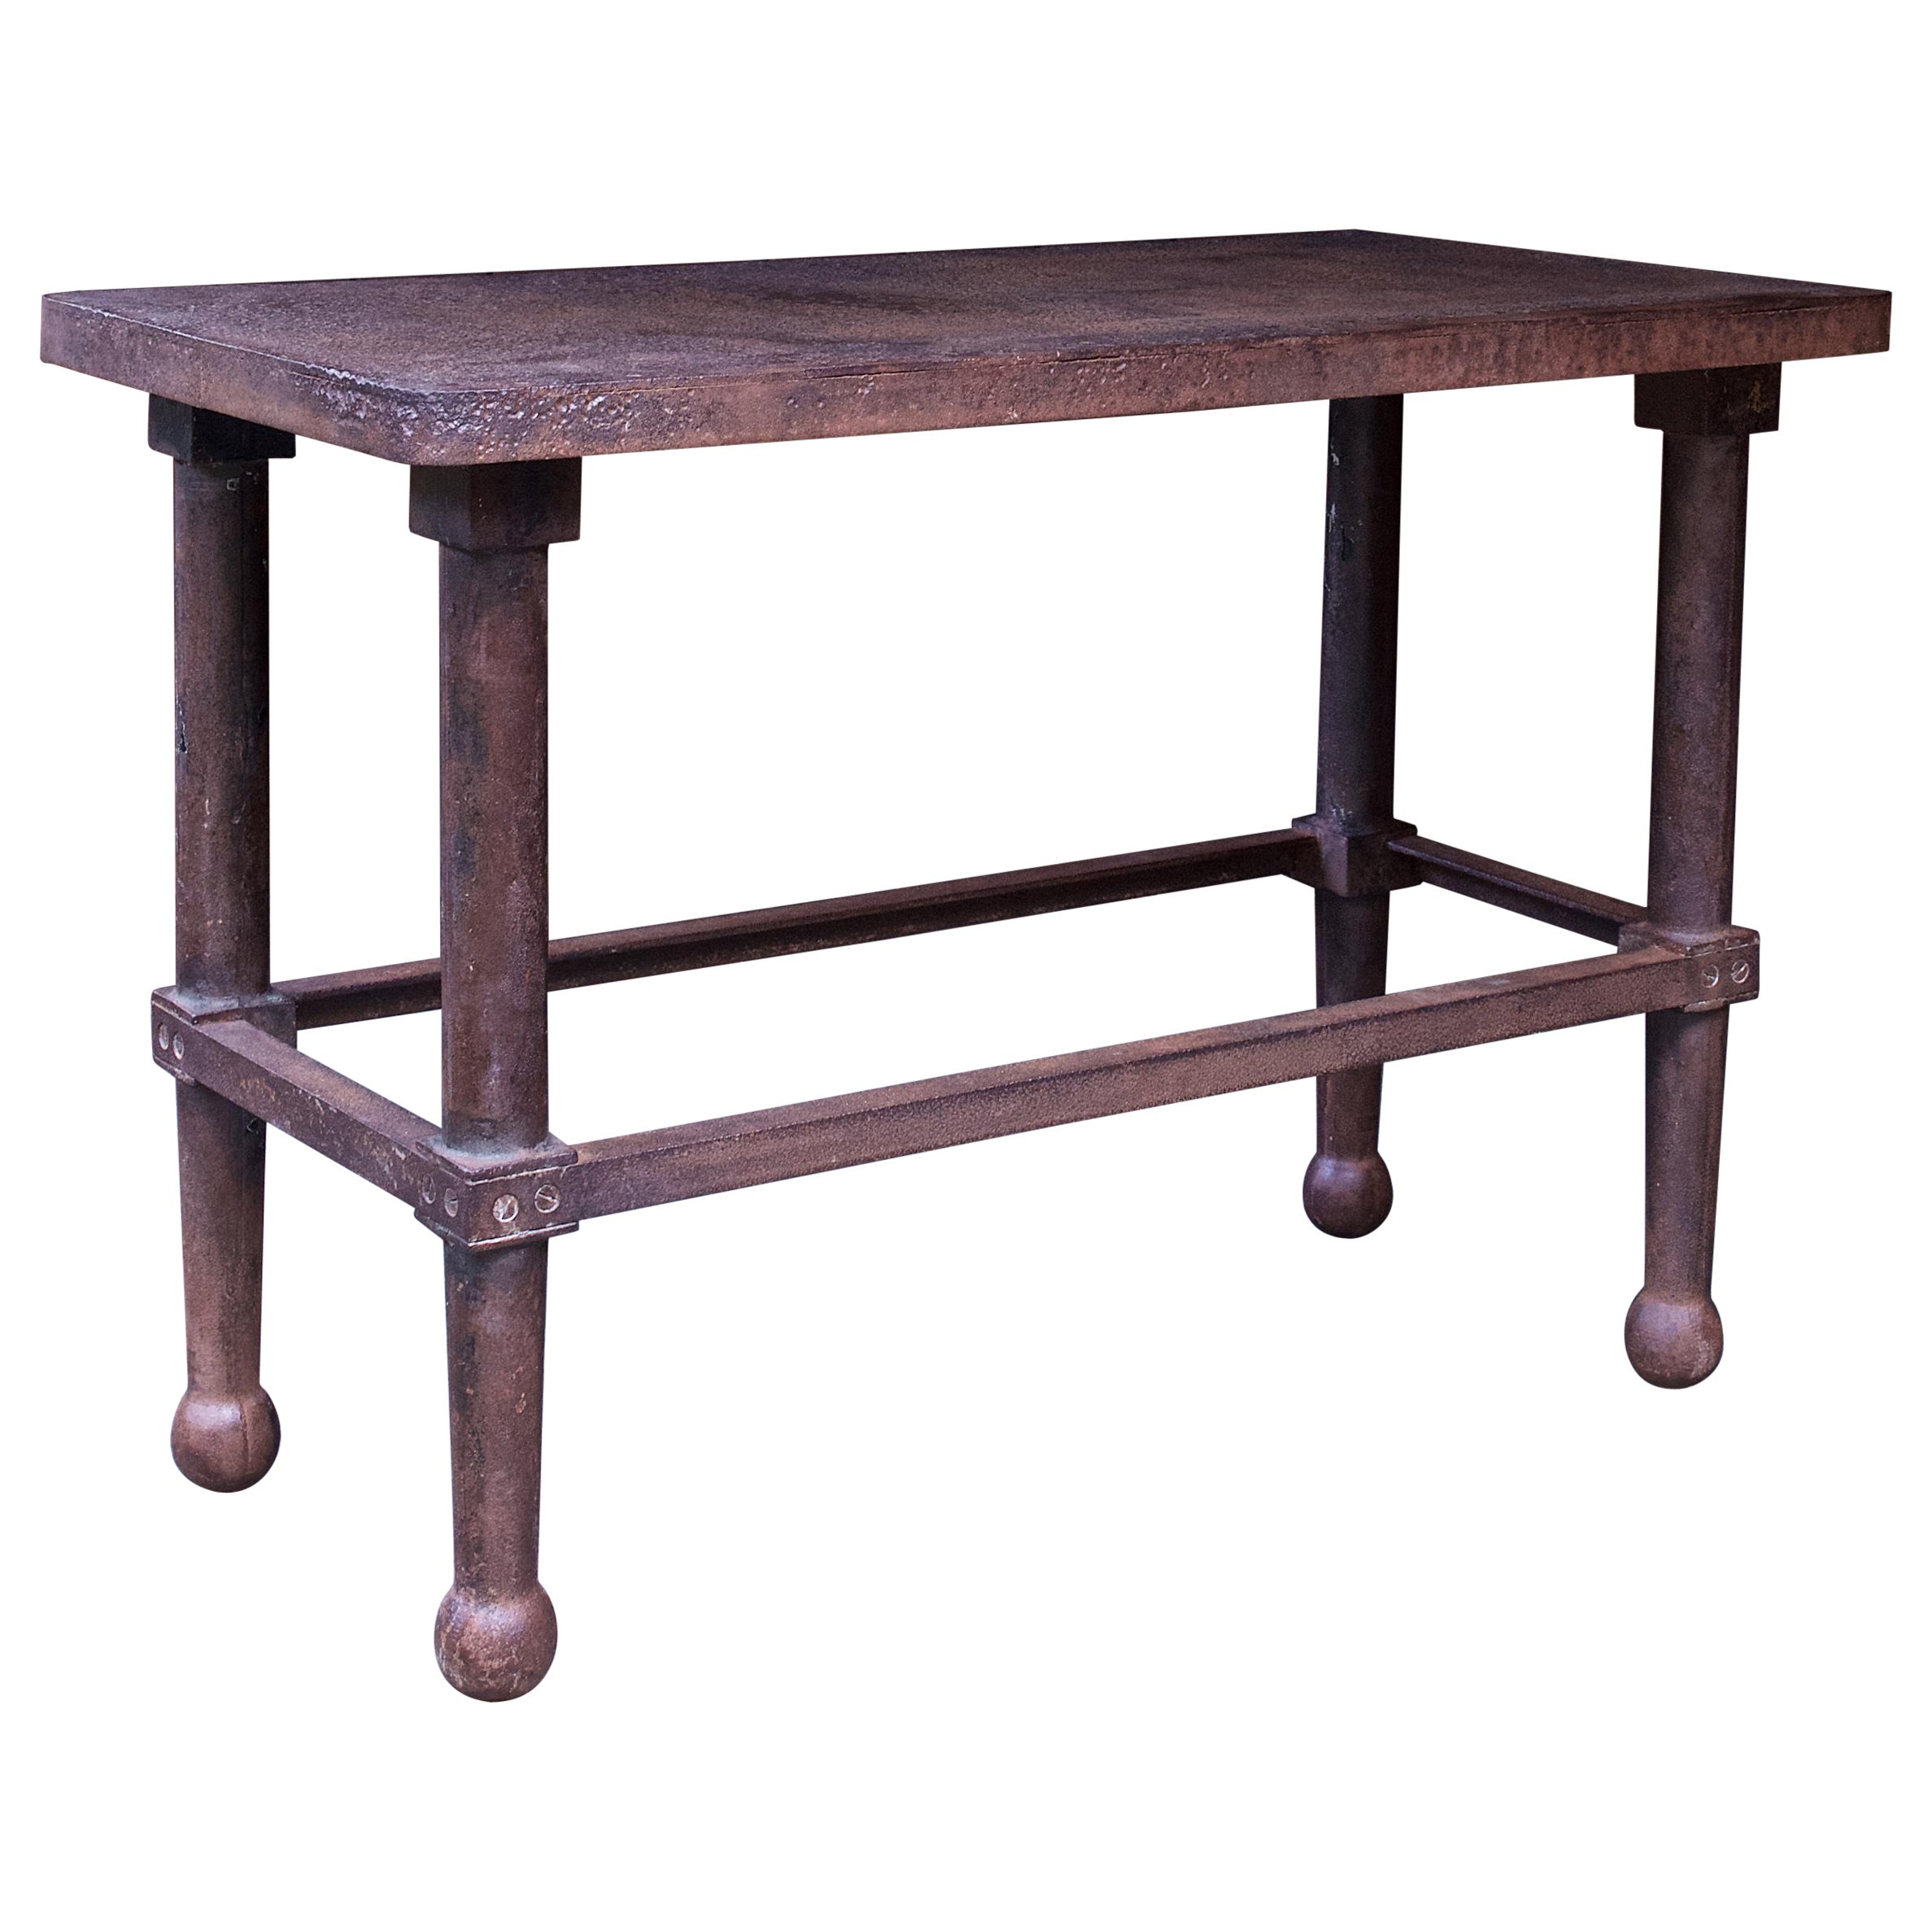 1880s Victorian Mercantile Forged Iron Work Table Vintage Industrial Console